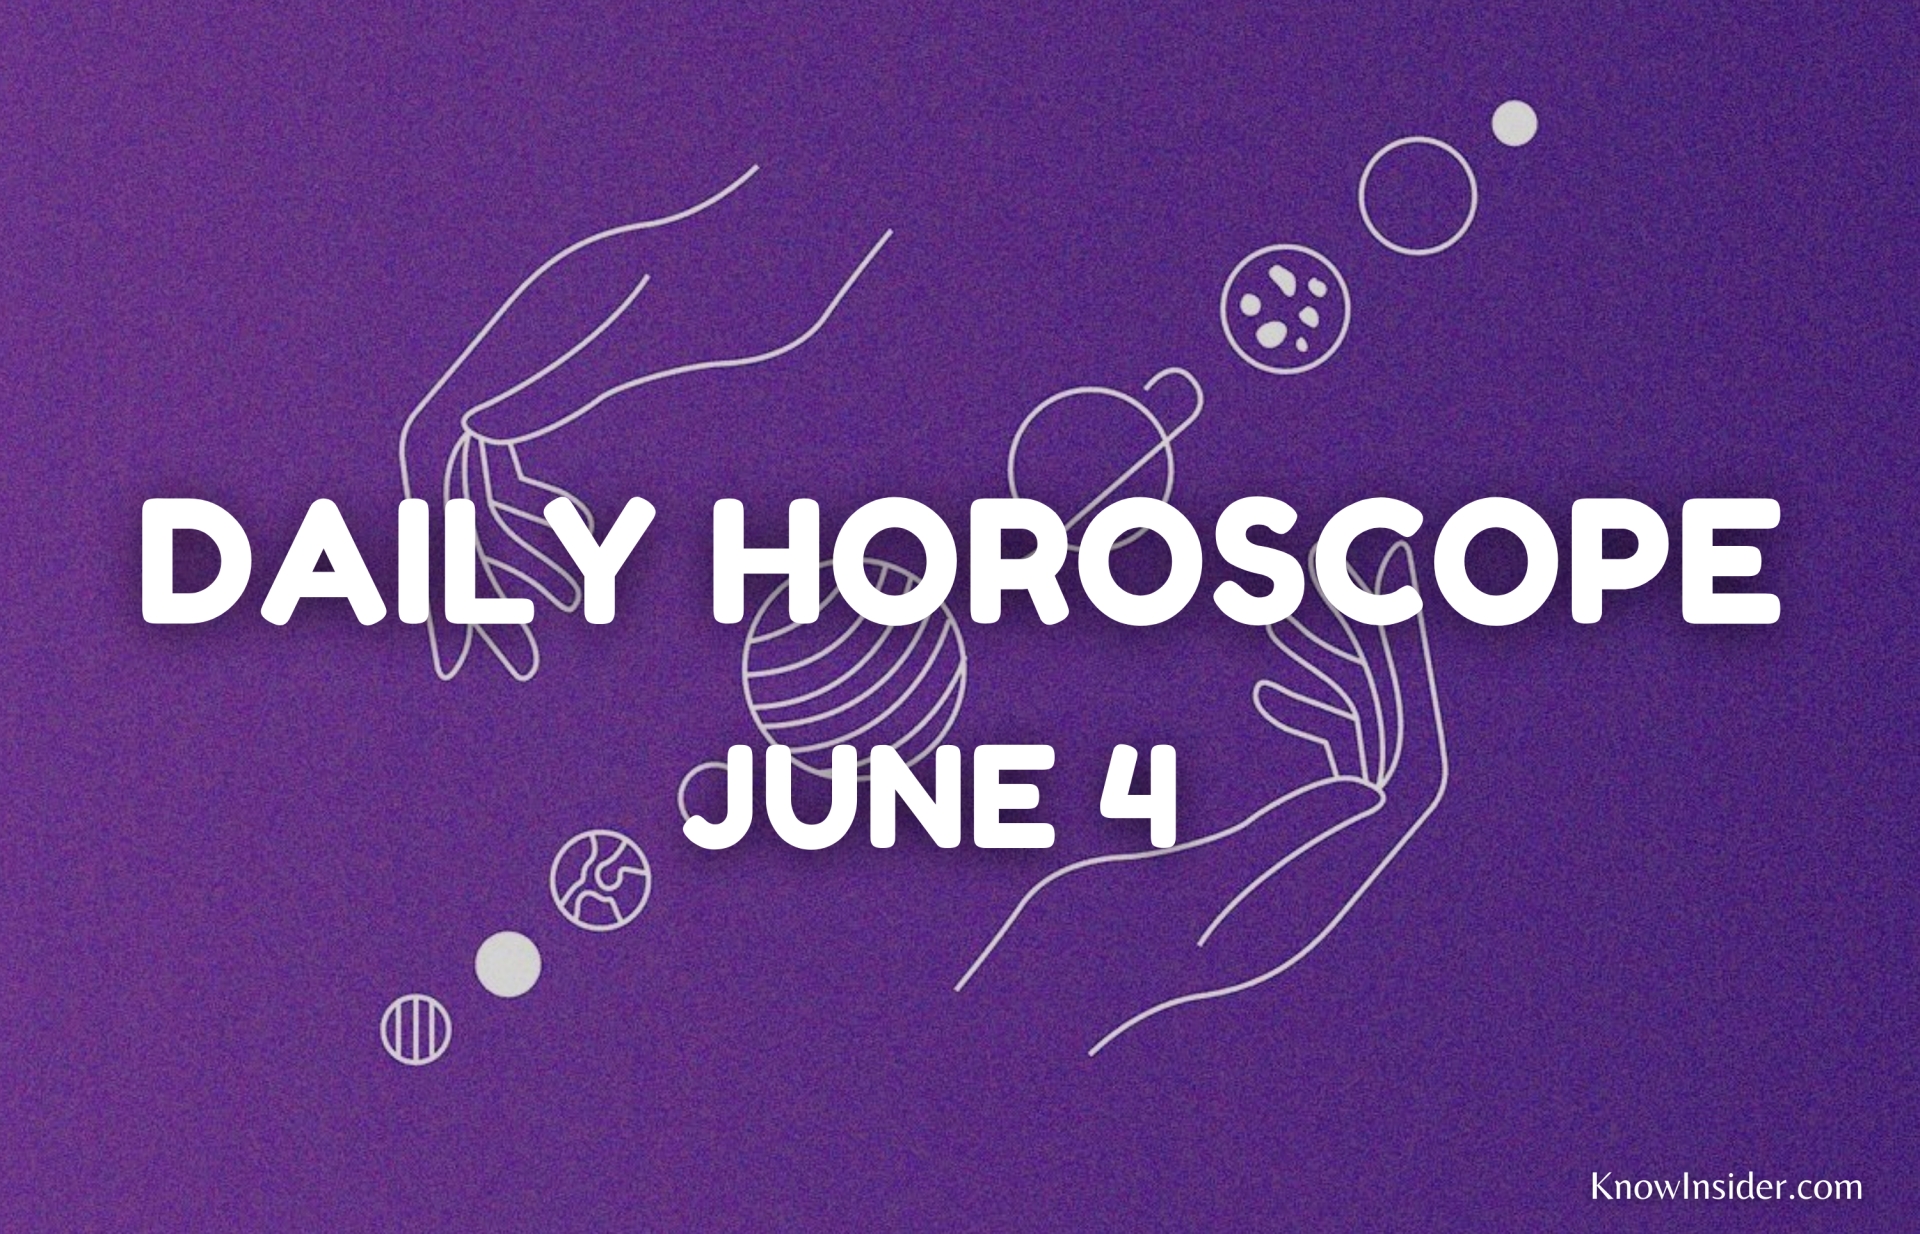 Daily Horoscope (Friday, June 4): Prediction For All Zodiac Signs with Love, Health, Money and Career